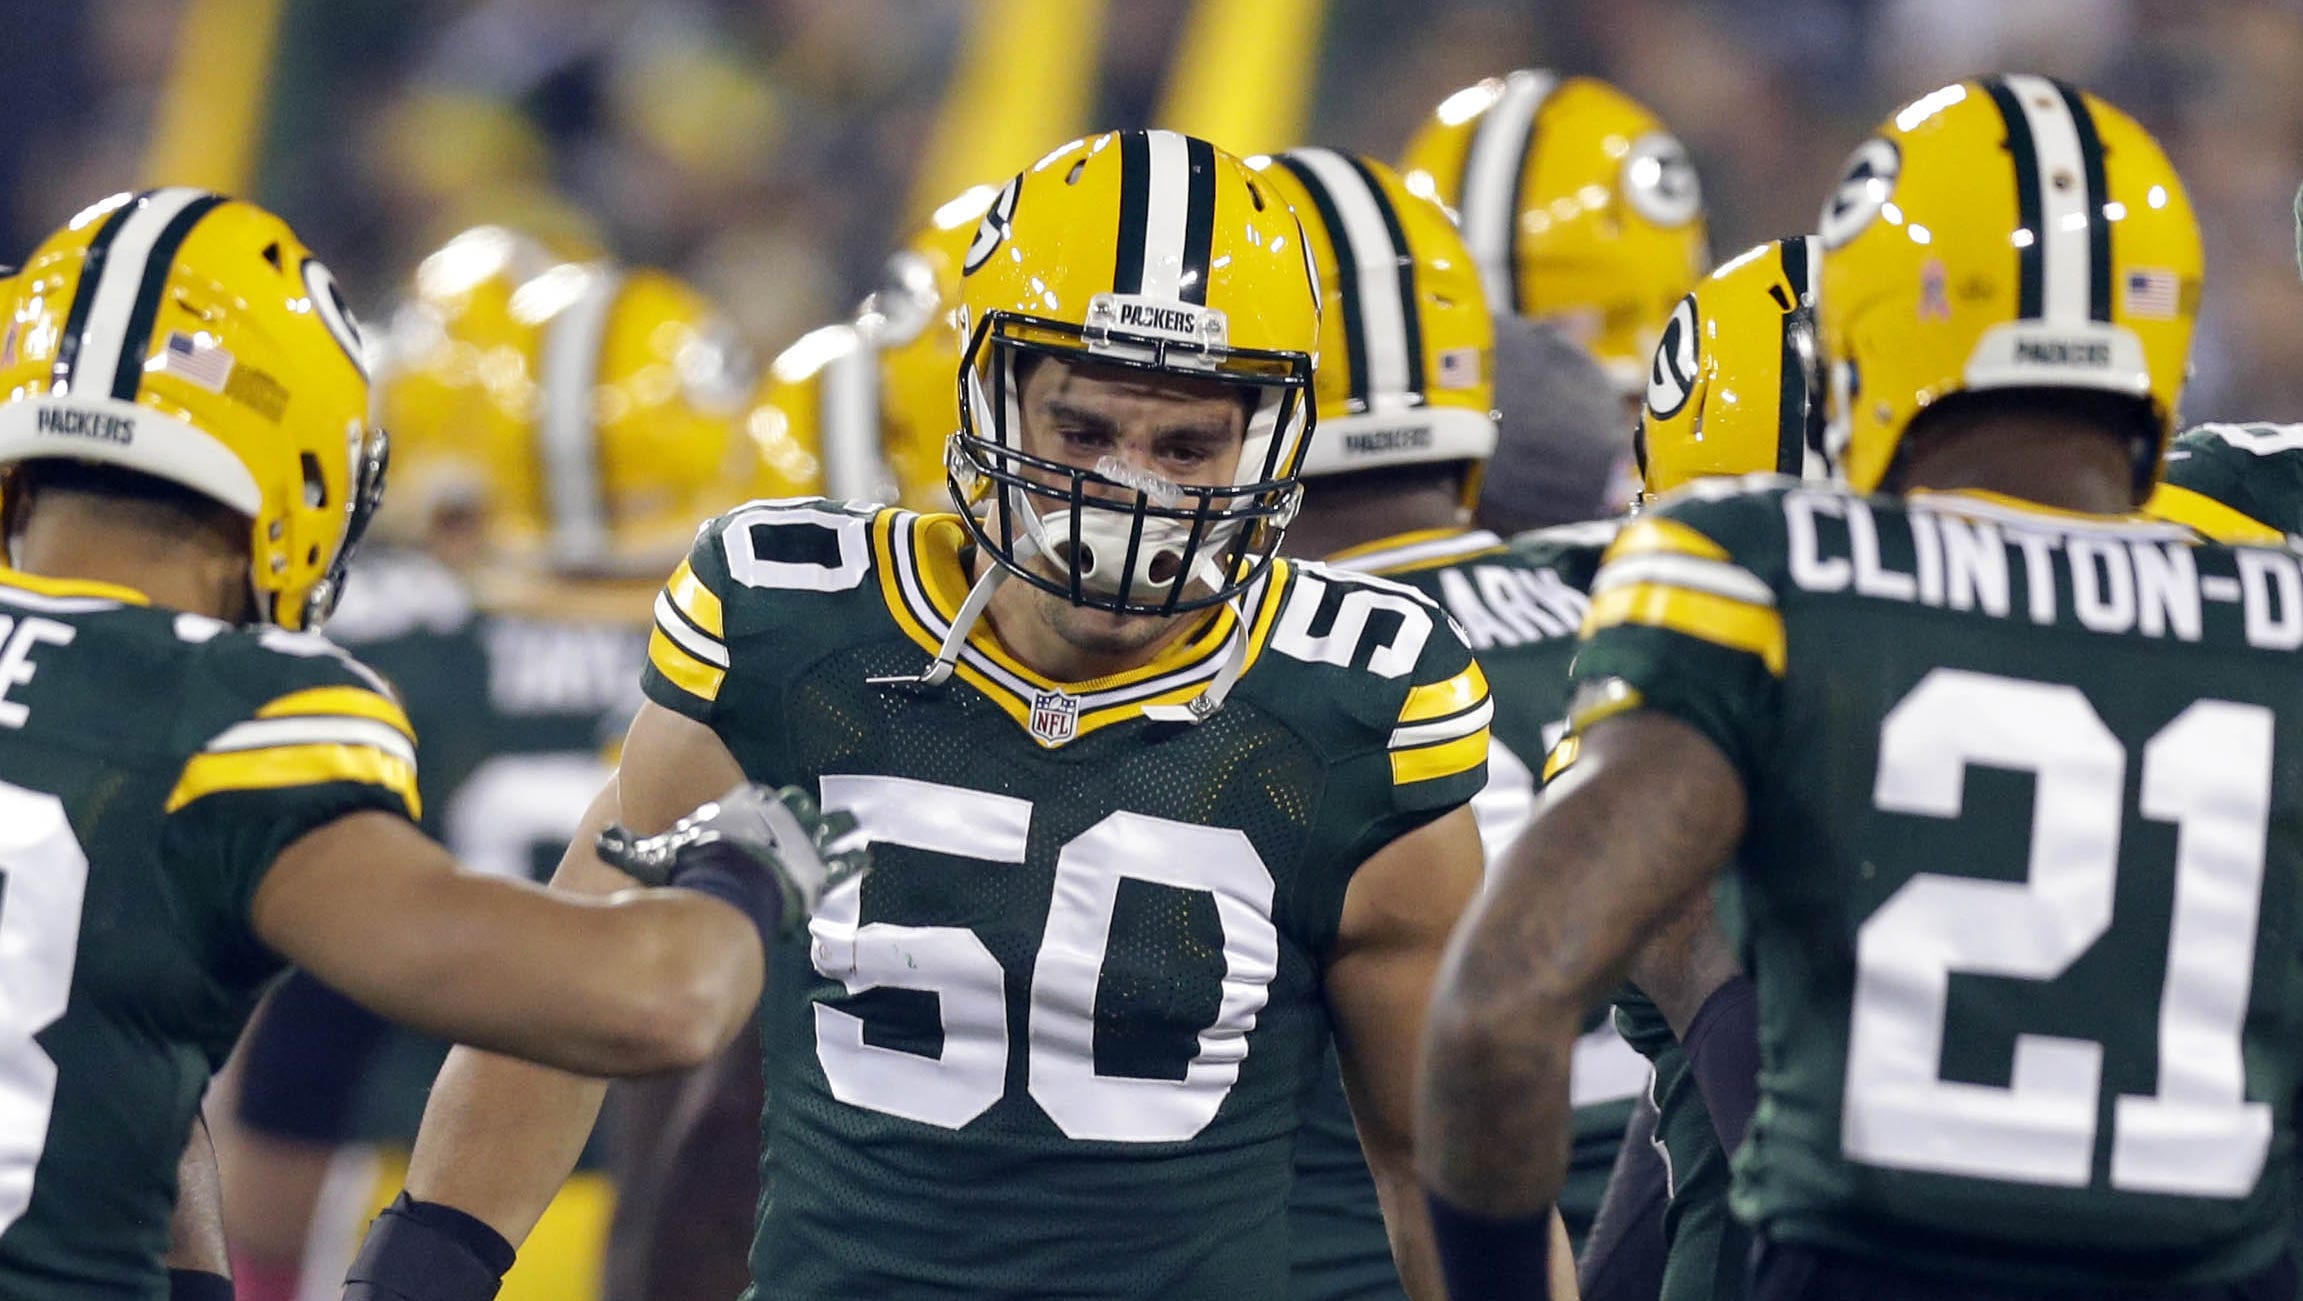 Green Bay Packers linebacker Blake Martinez (50) greets teammates before the a game against the New York Giants on Oct. 9, 2016, at Lambeau Field.